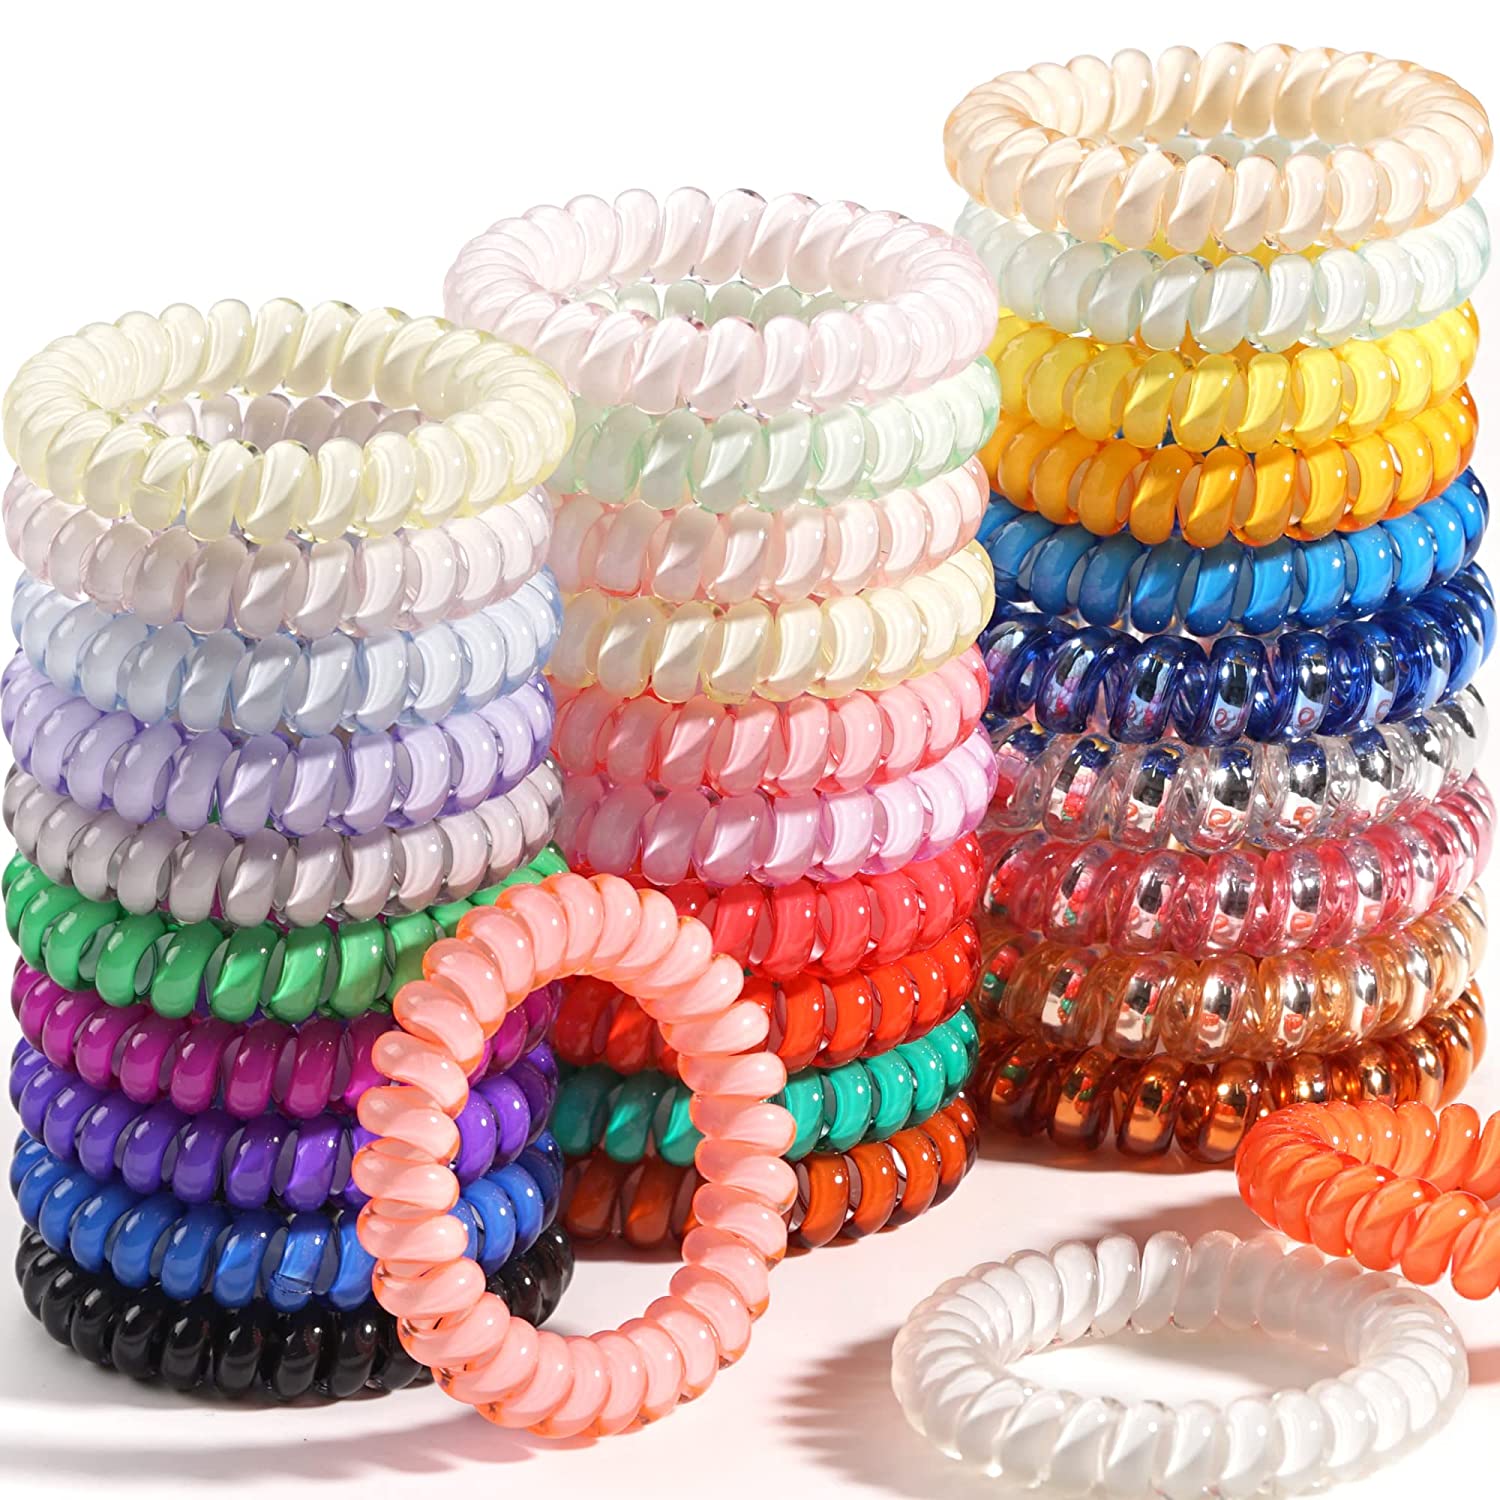 Spiral Hair Ties,50 Pcs Colorful No Crease Hair Ties,Candy Color Phone Cord Hair Ties Coils,Spiral Bracelets,Elastic Coil Hair Ties Ponytail Holders Hair Accessories for Women Girls All Hair Styles - image 1 of 10